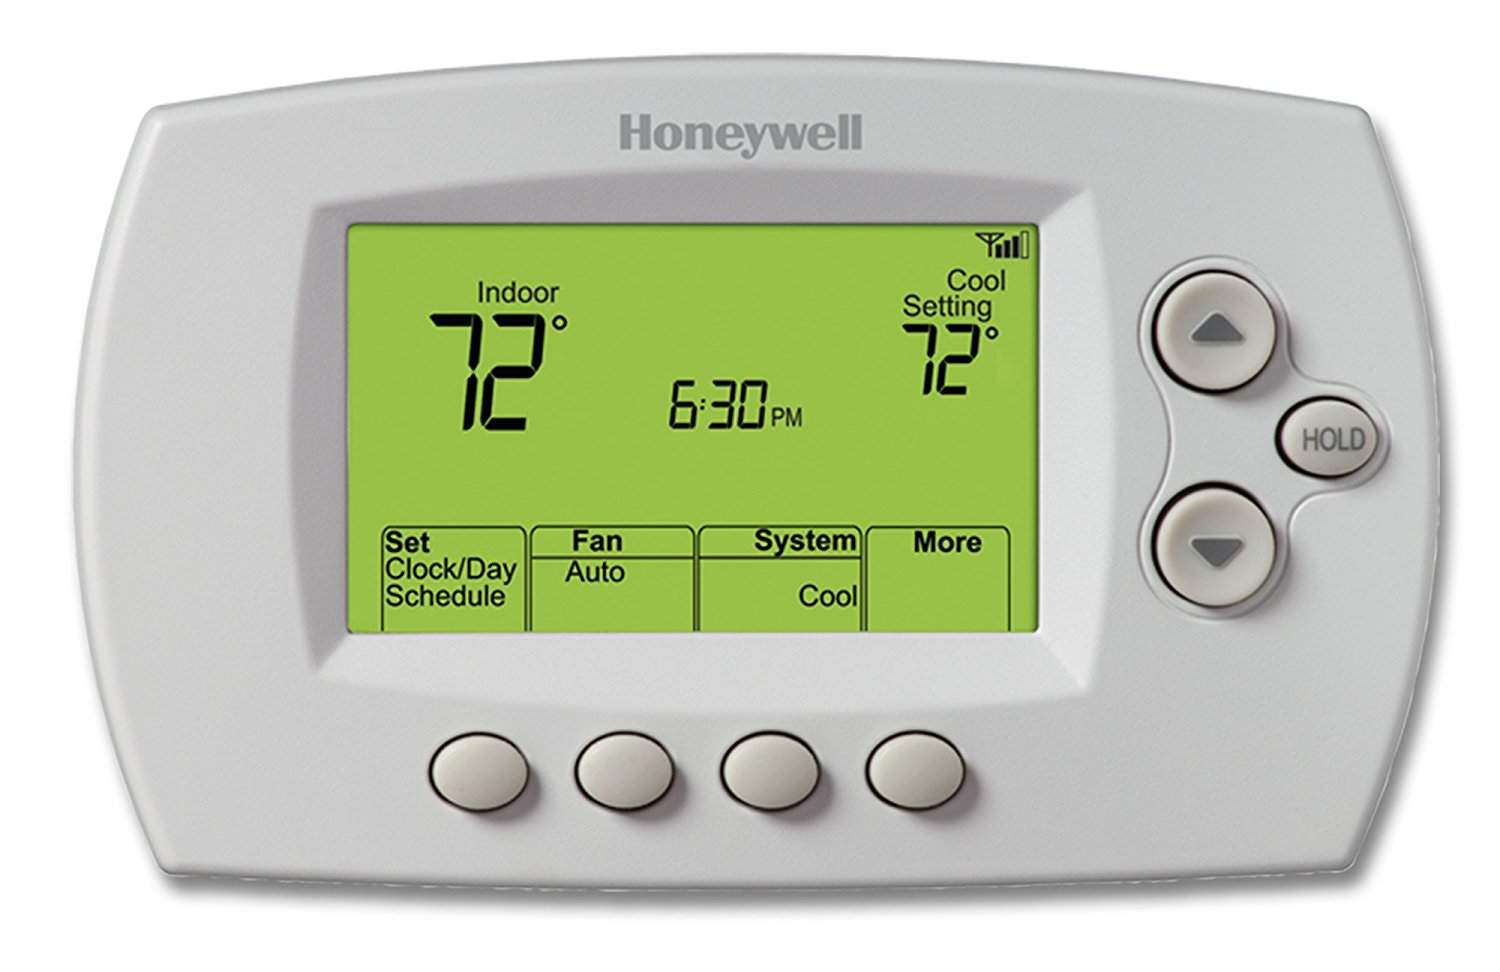 How To Program Honeywell Thermostat For Heat Pump